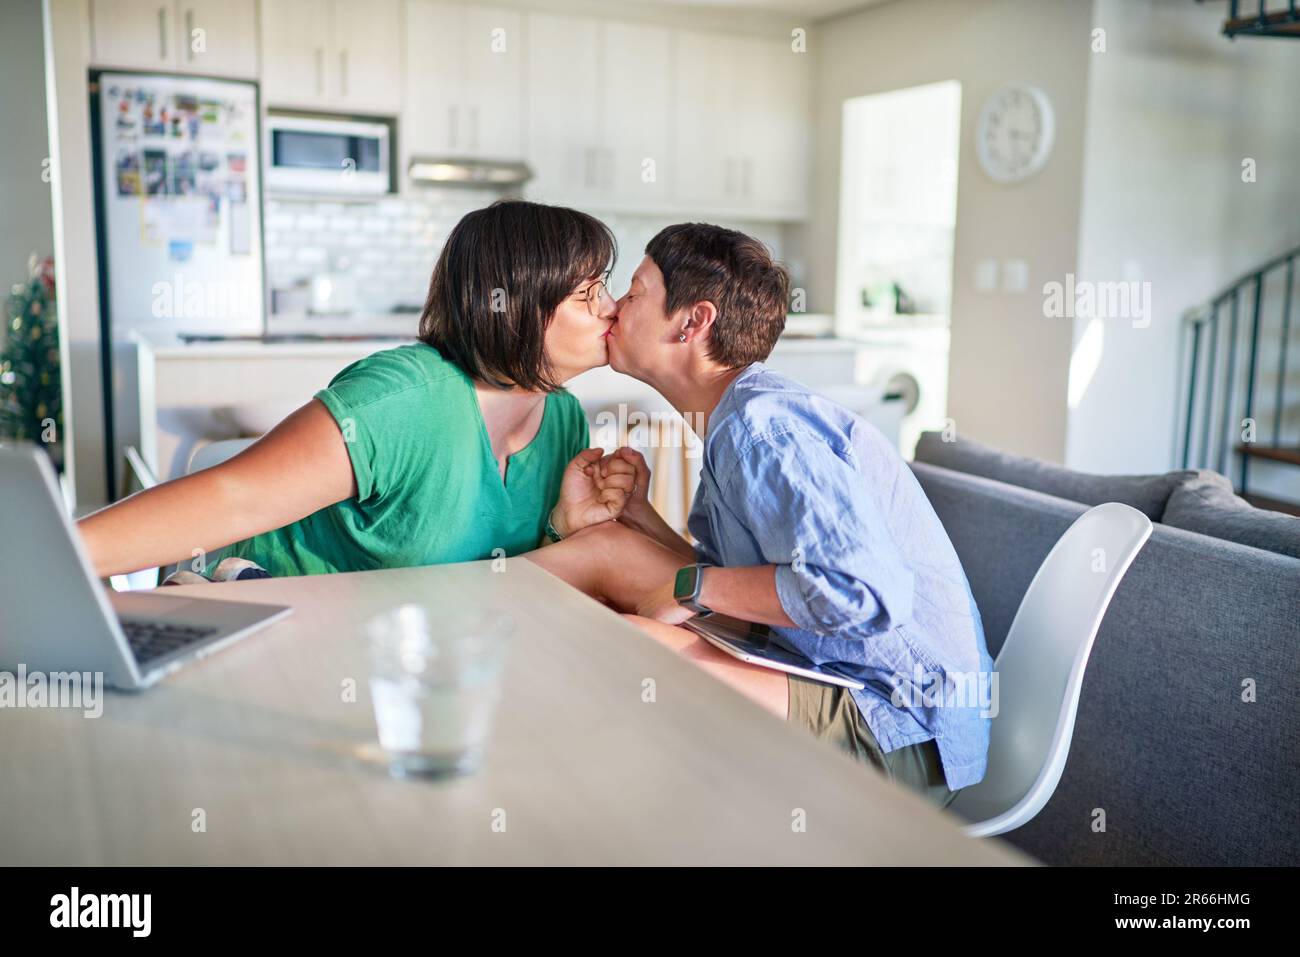 Affectionate lesbian couple kissing face to face at dining table Stock Photo